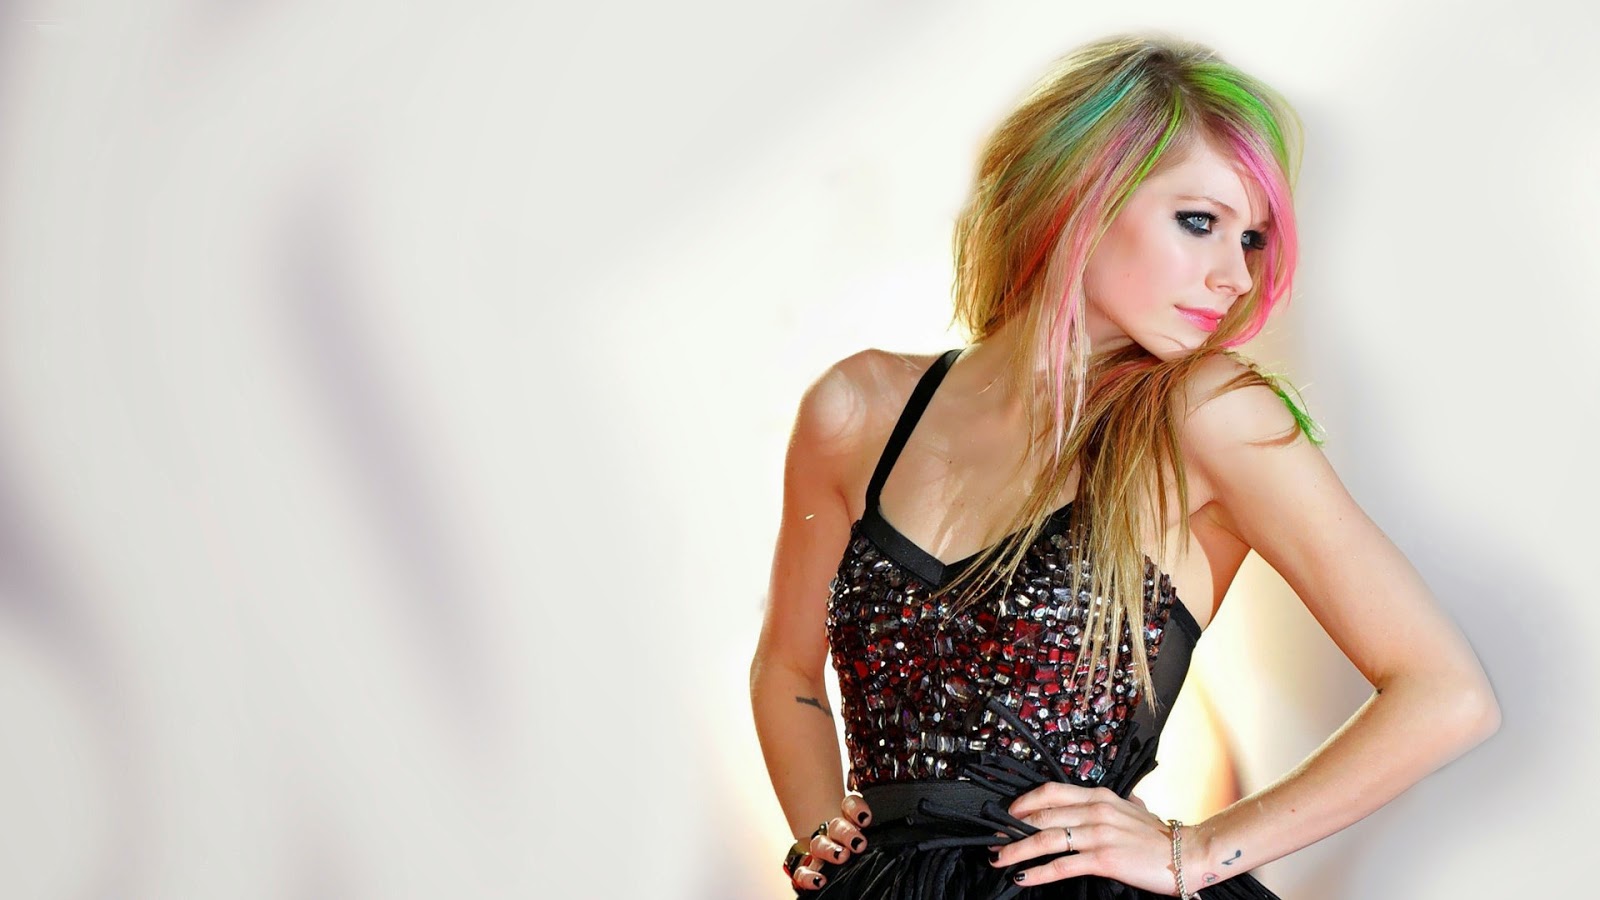 Avril Lavigne Hd Wallpapers Free Download ~ Unique Wallpapers